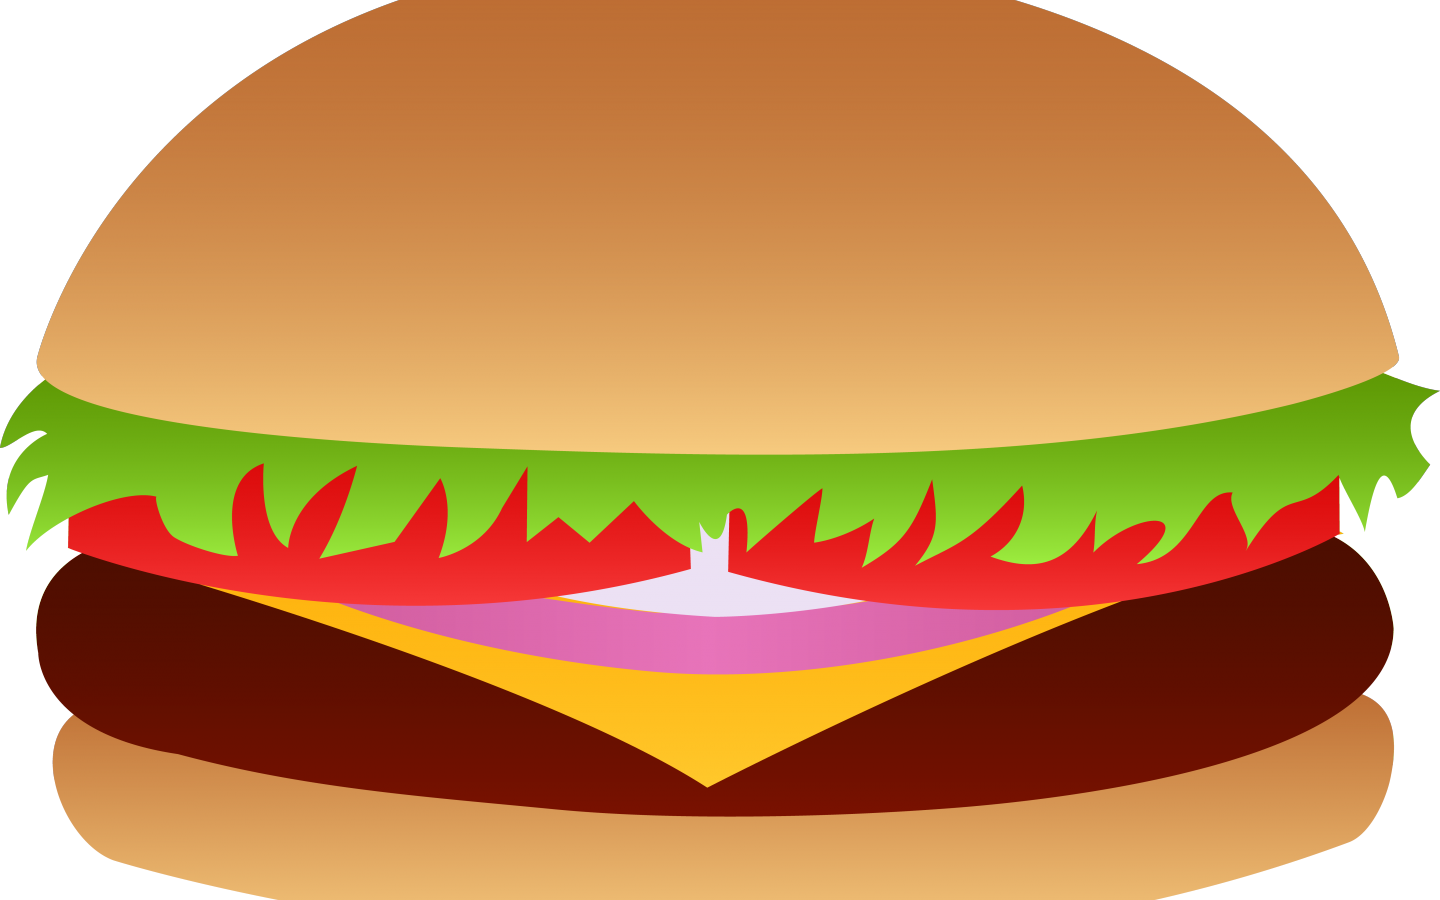 Cheeseburger Sweetclipart - Png Download (1440x900), Png Download